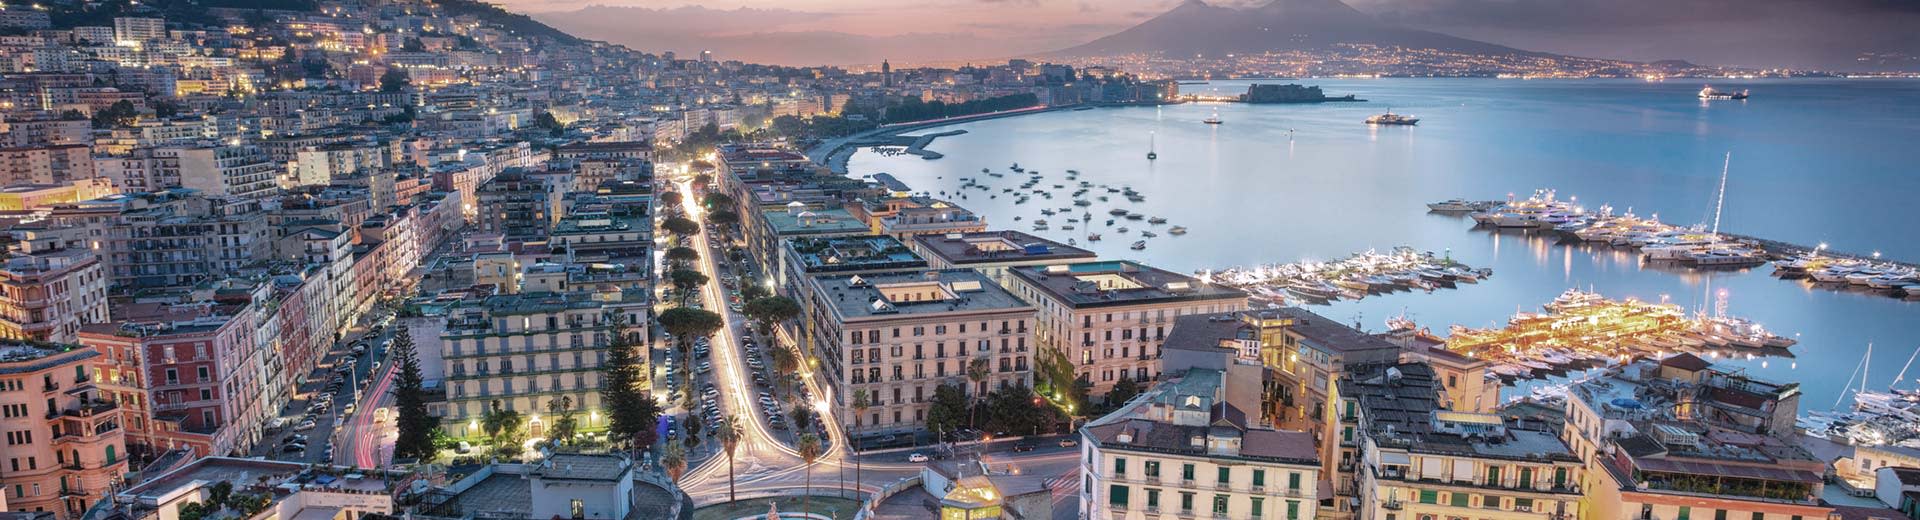 The beautiful city of Naples stretches across the coast at dusk, with the ocean lying in the background.